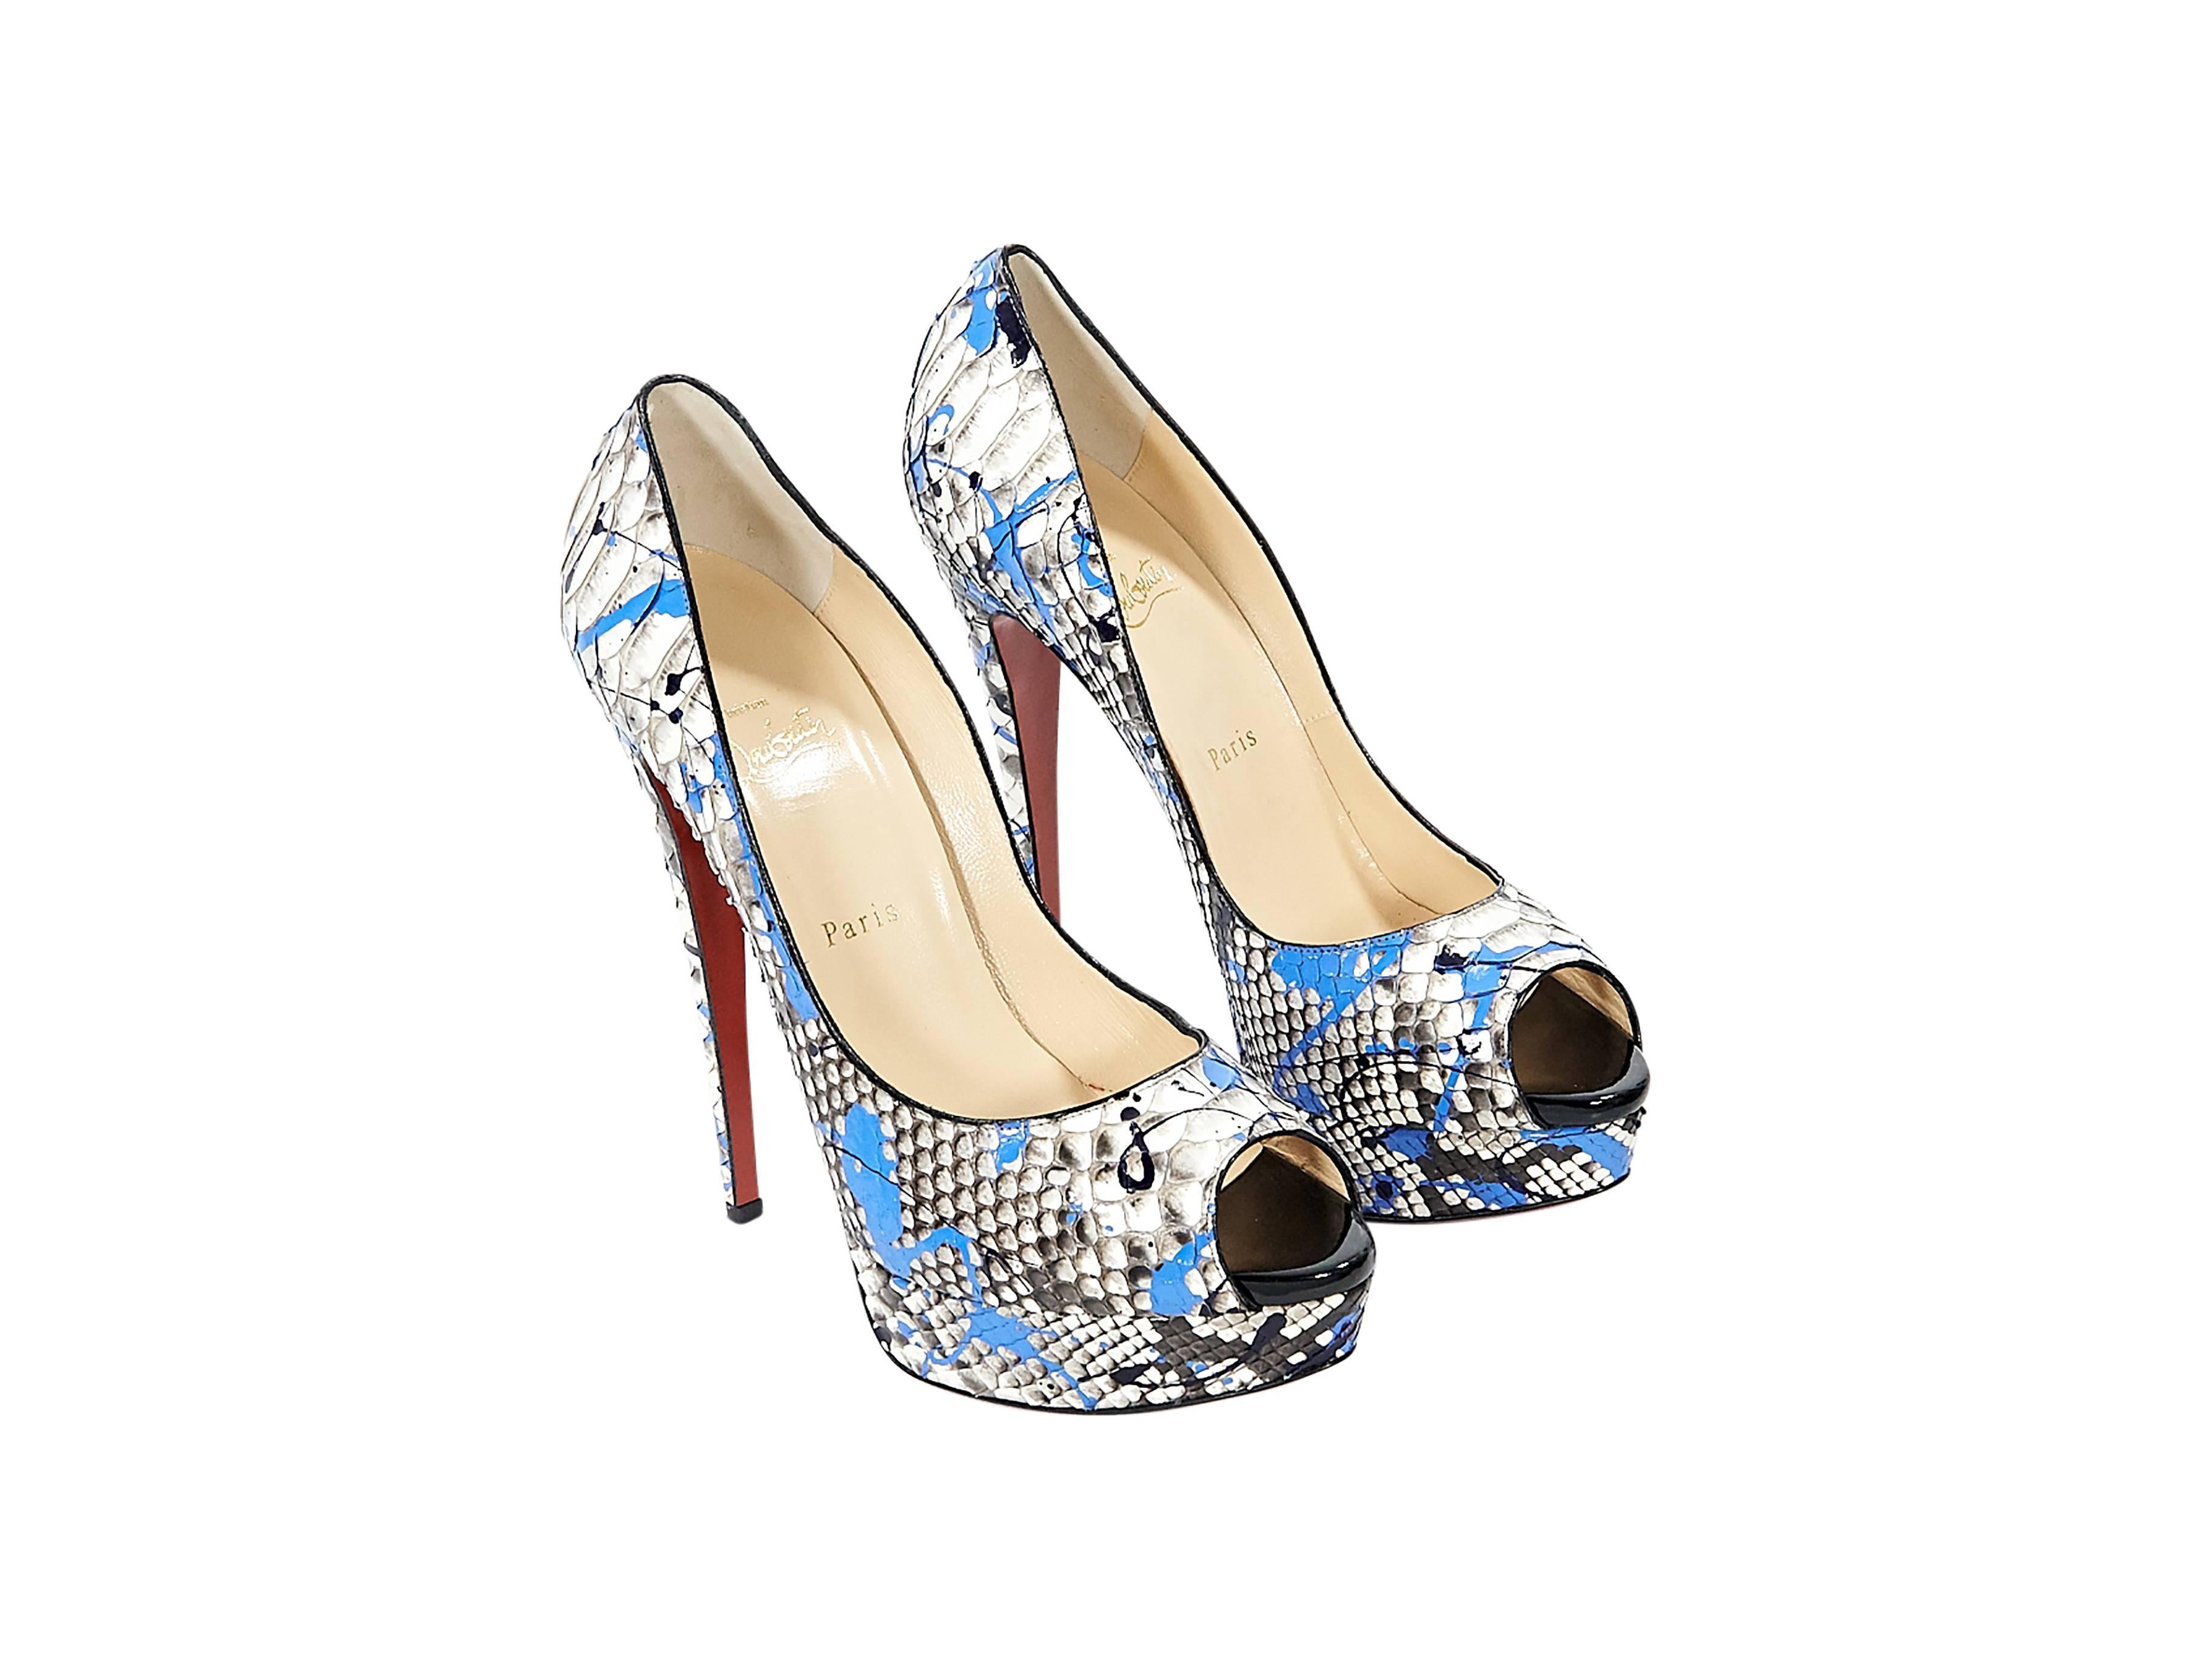 Product details: Multicolor python Lady Graffiti pumps by Christian Louboutin. Peep toe. Towering stiletto and platform design. Iconic red sole. Slip-on style. 
Condition: Pre-owned. Very good.

Est. Retail $ 1,575.00